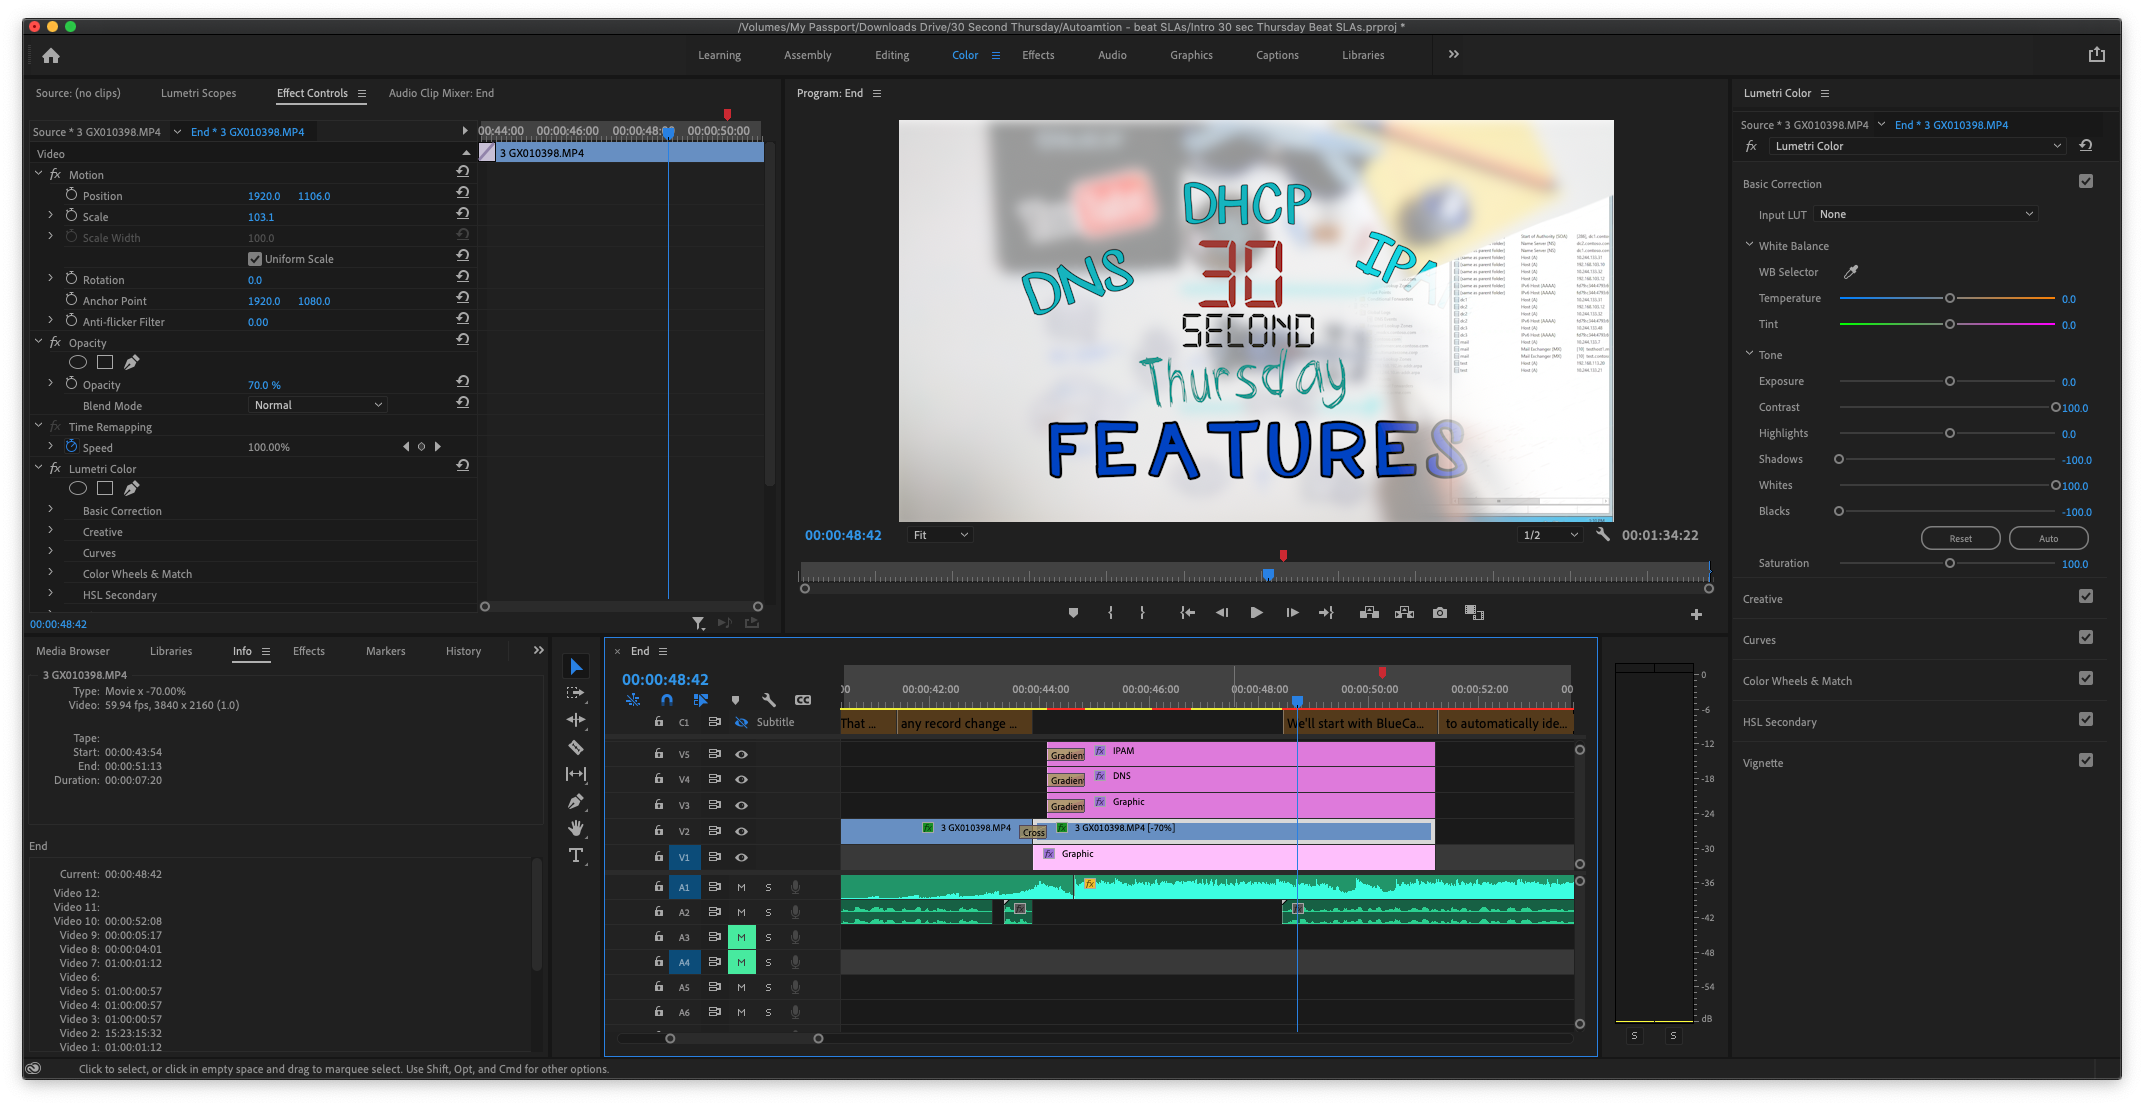 Look at the video marketing tools out there like Adobe Premiere Pro, After Effects, Photoshop, and Audition to help build a live editing workflow.